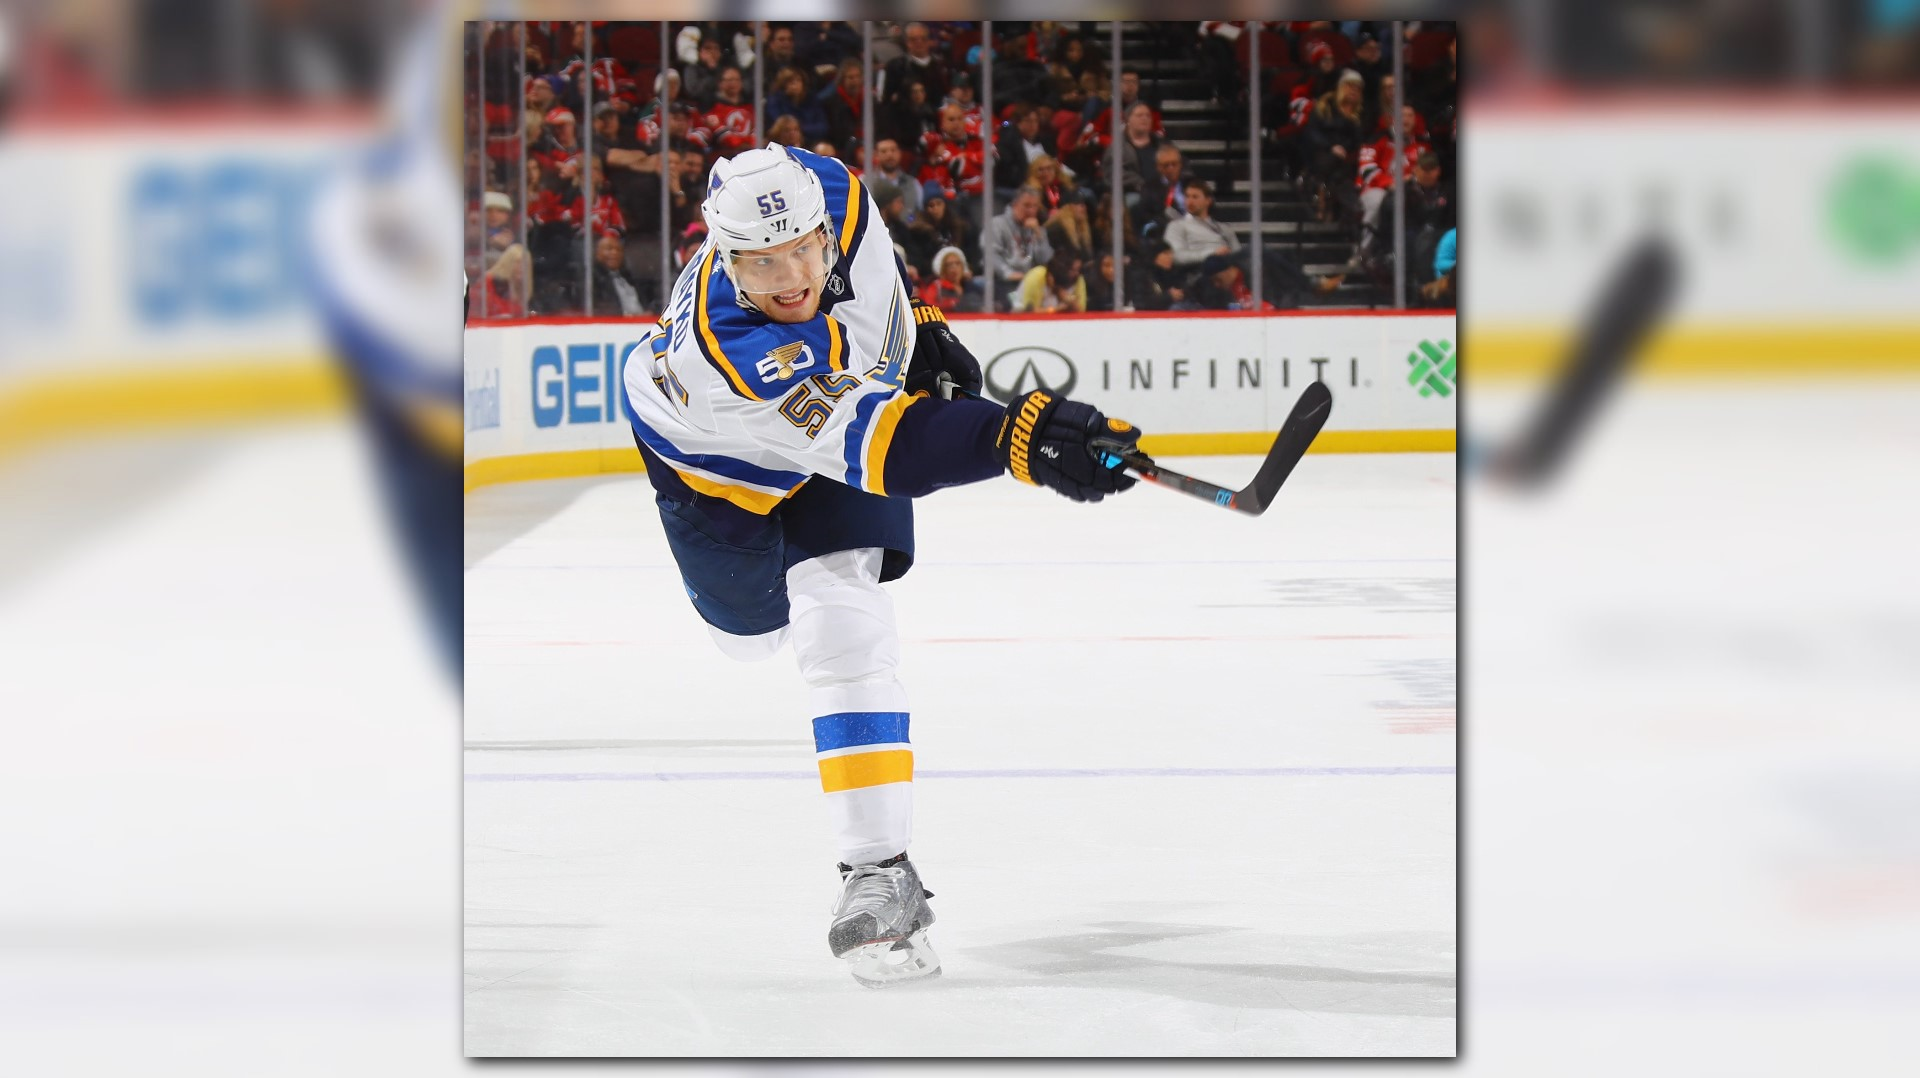 Former Nanook Colton Parayko inks 8-year extension with St. Louis